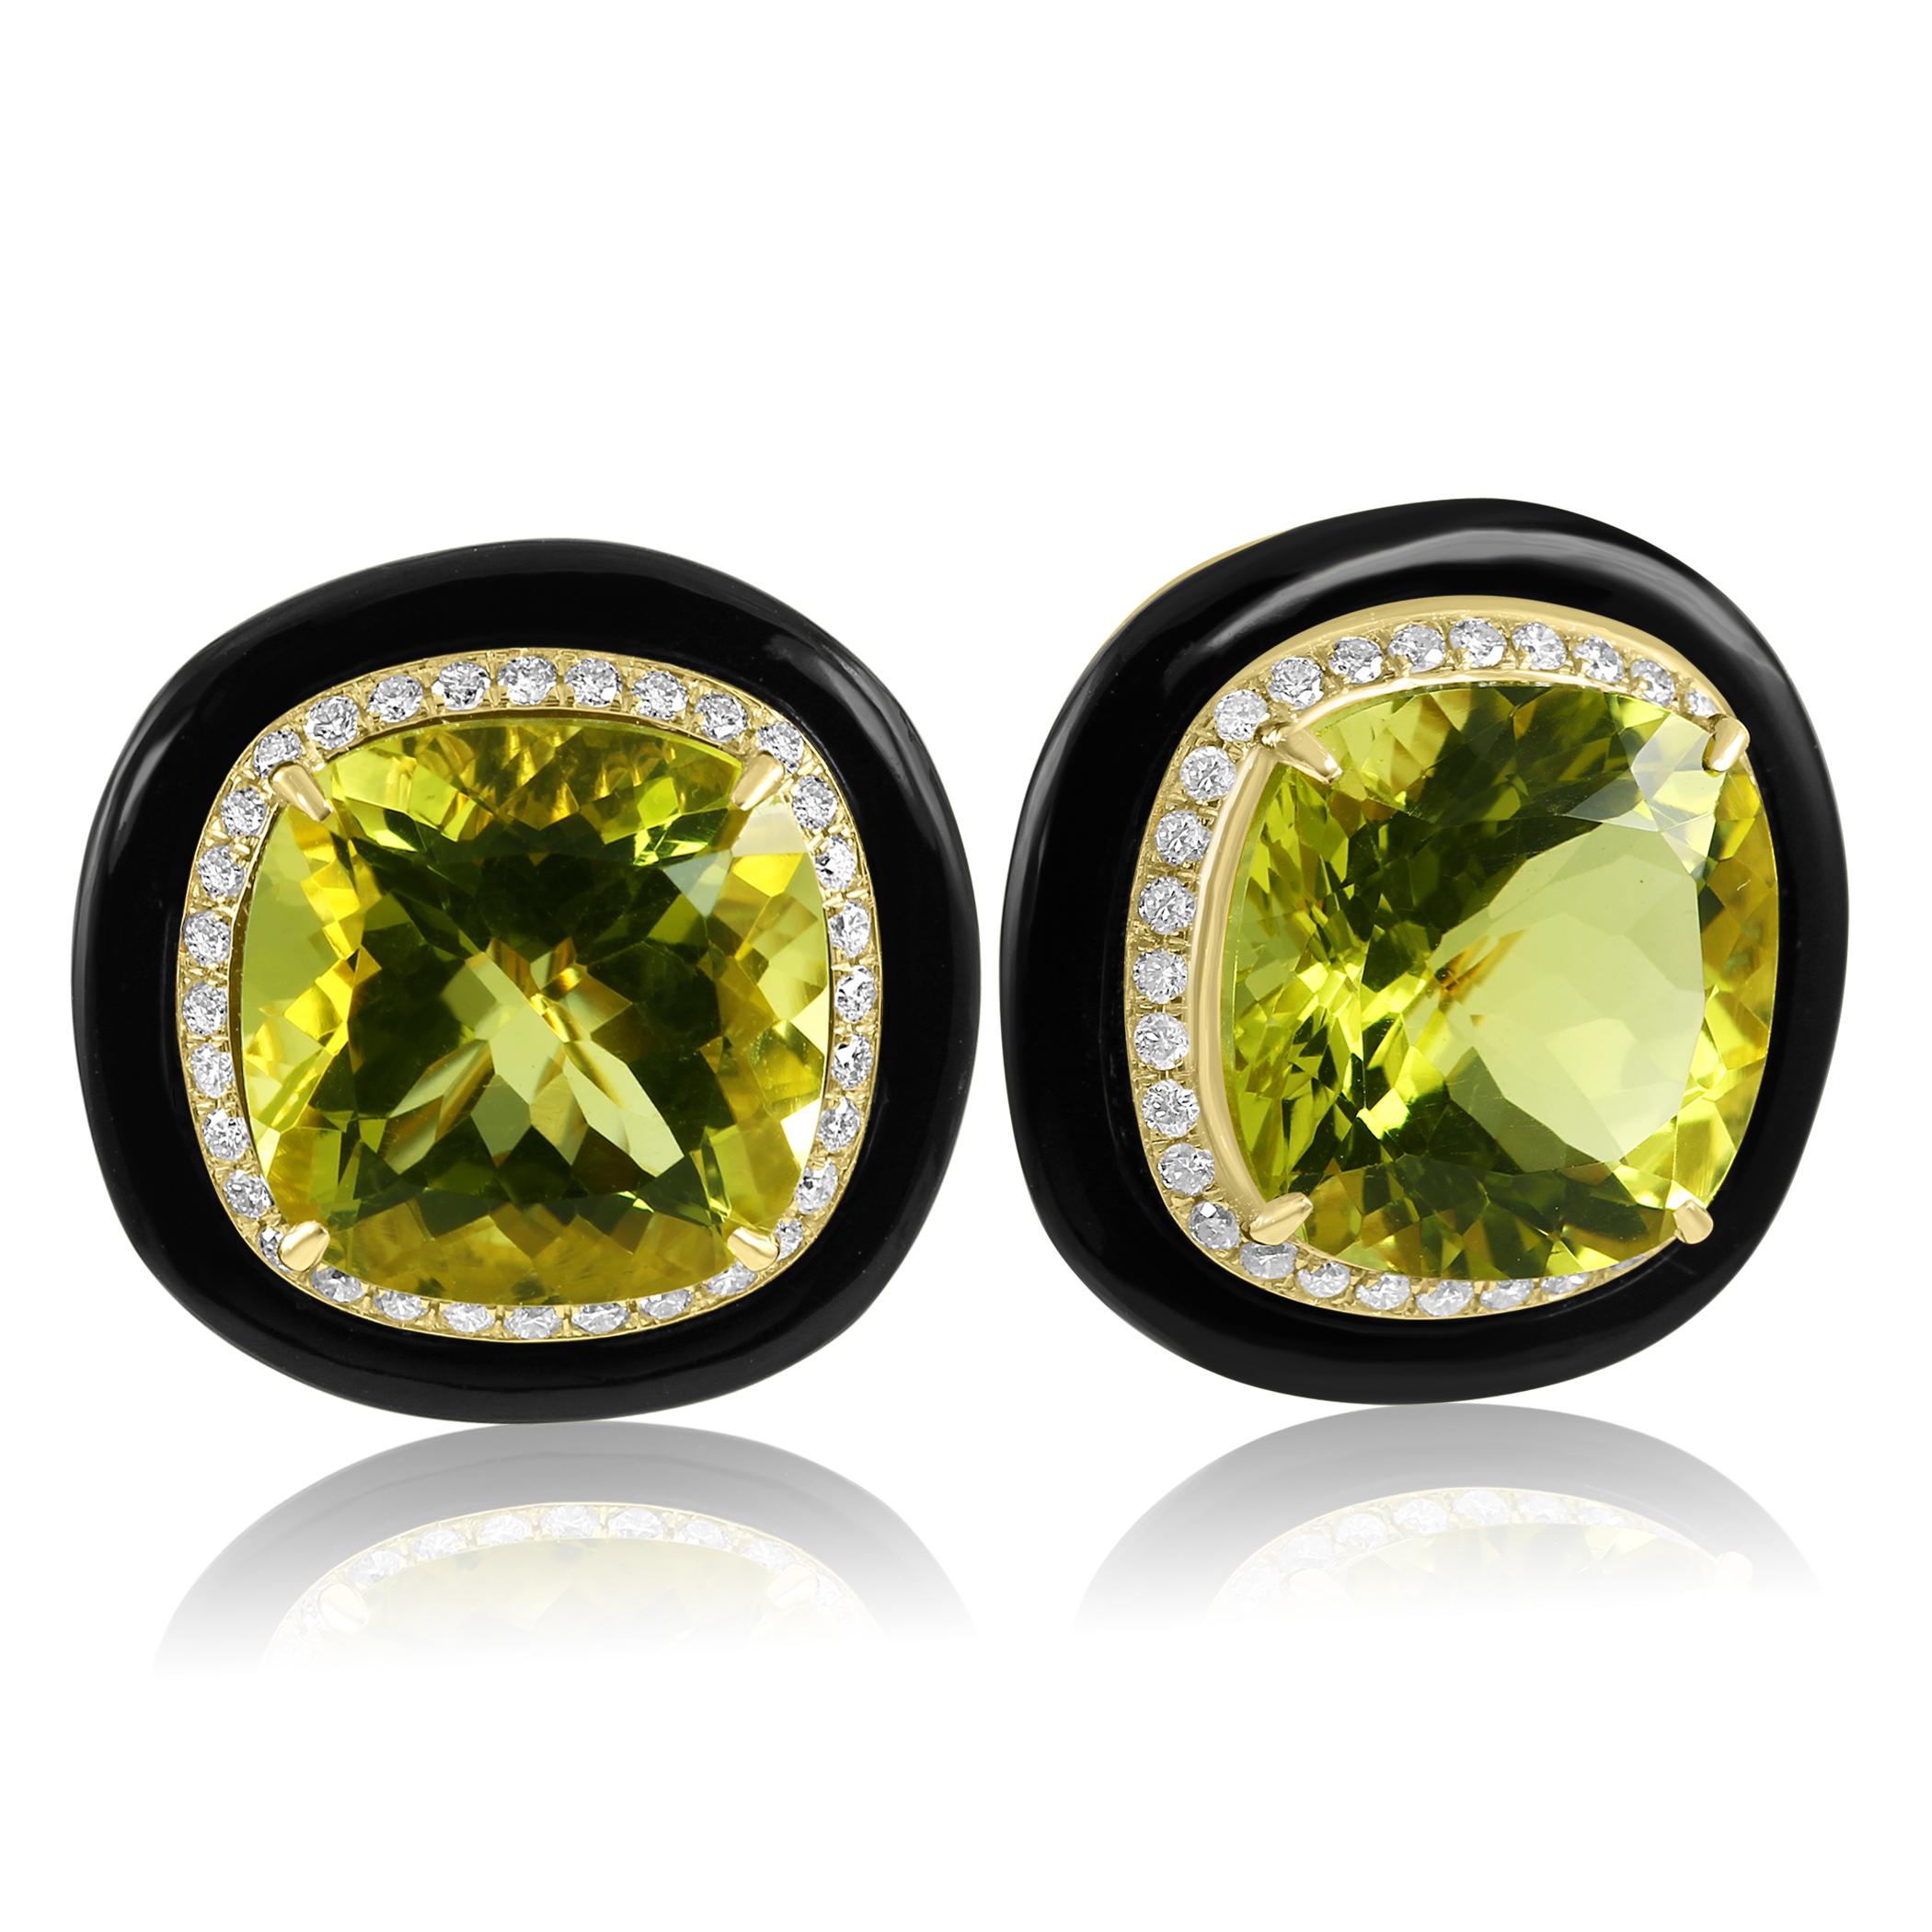 At the heart of these breathtaking earrings lies a stunning Lemon Quartz Cushion, carefully selected for its impressive size and breathtaking clarity. With a total weight of 20.84 carats, these two quartz gemstones exhibit a captivating sparkle and